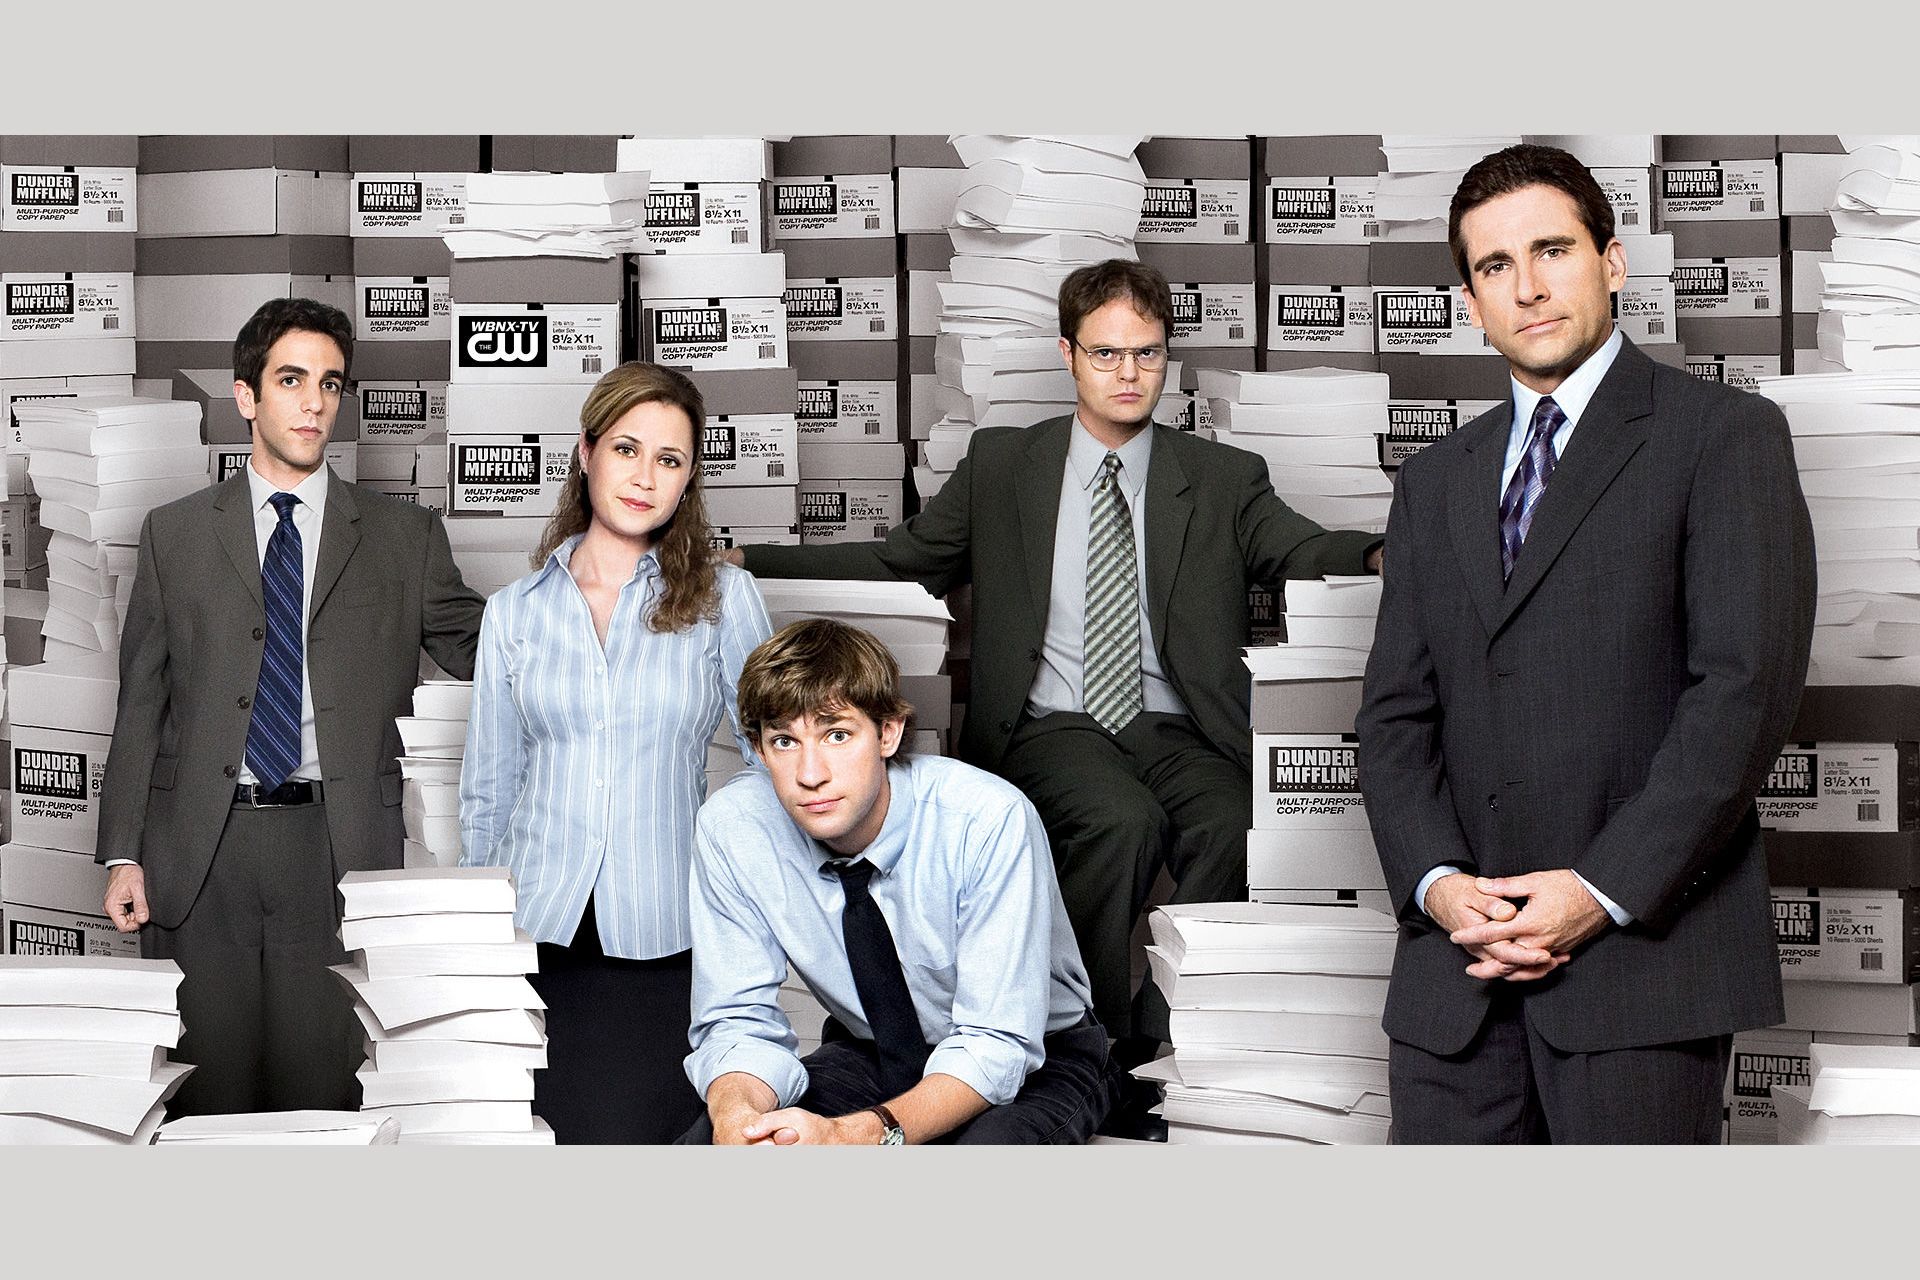 How Well Do You Know The Office